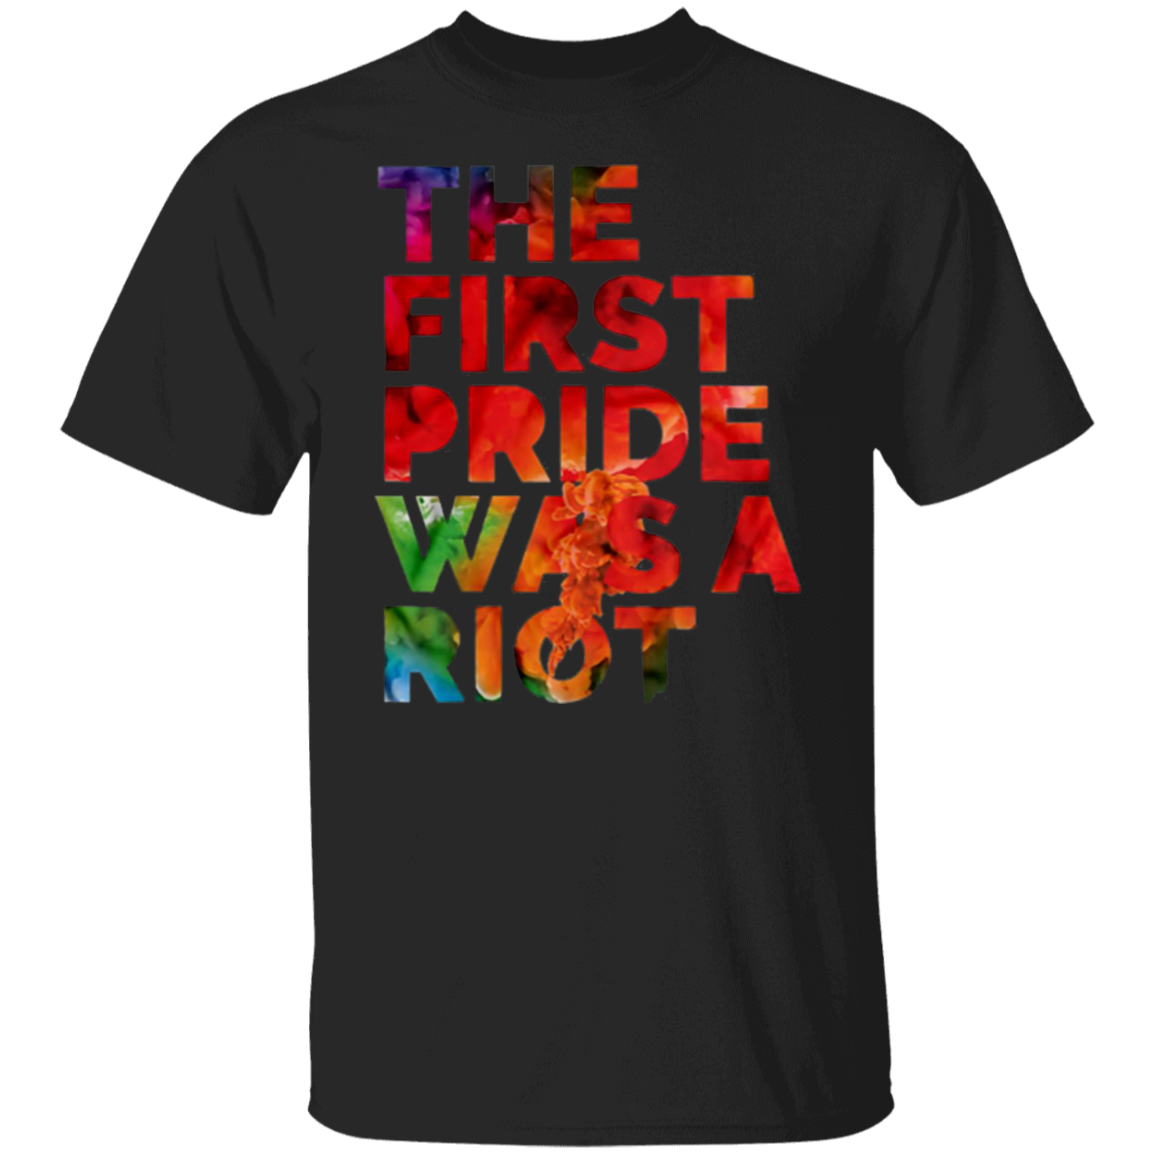 The First Pride Was A Riot Shirt LGBT History Month Pride Month Shirts ...